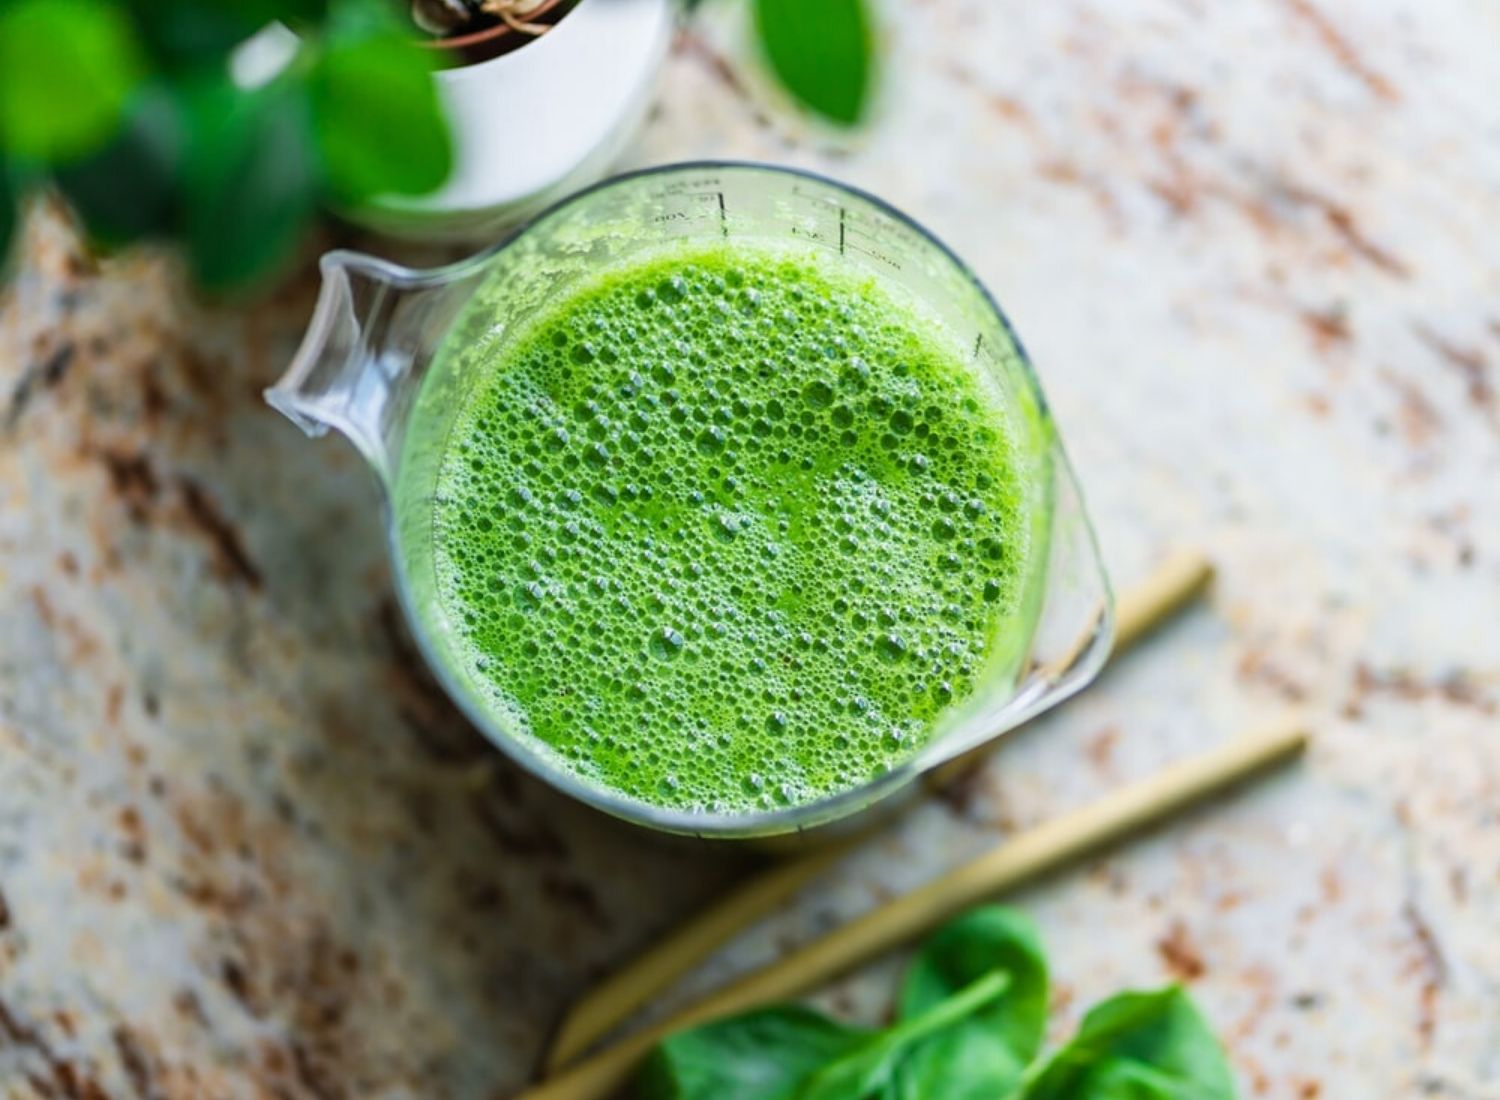 Green Beverage As A Choice In The Lifestyle